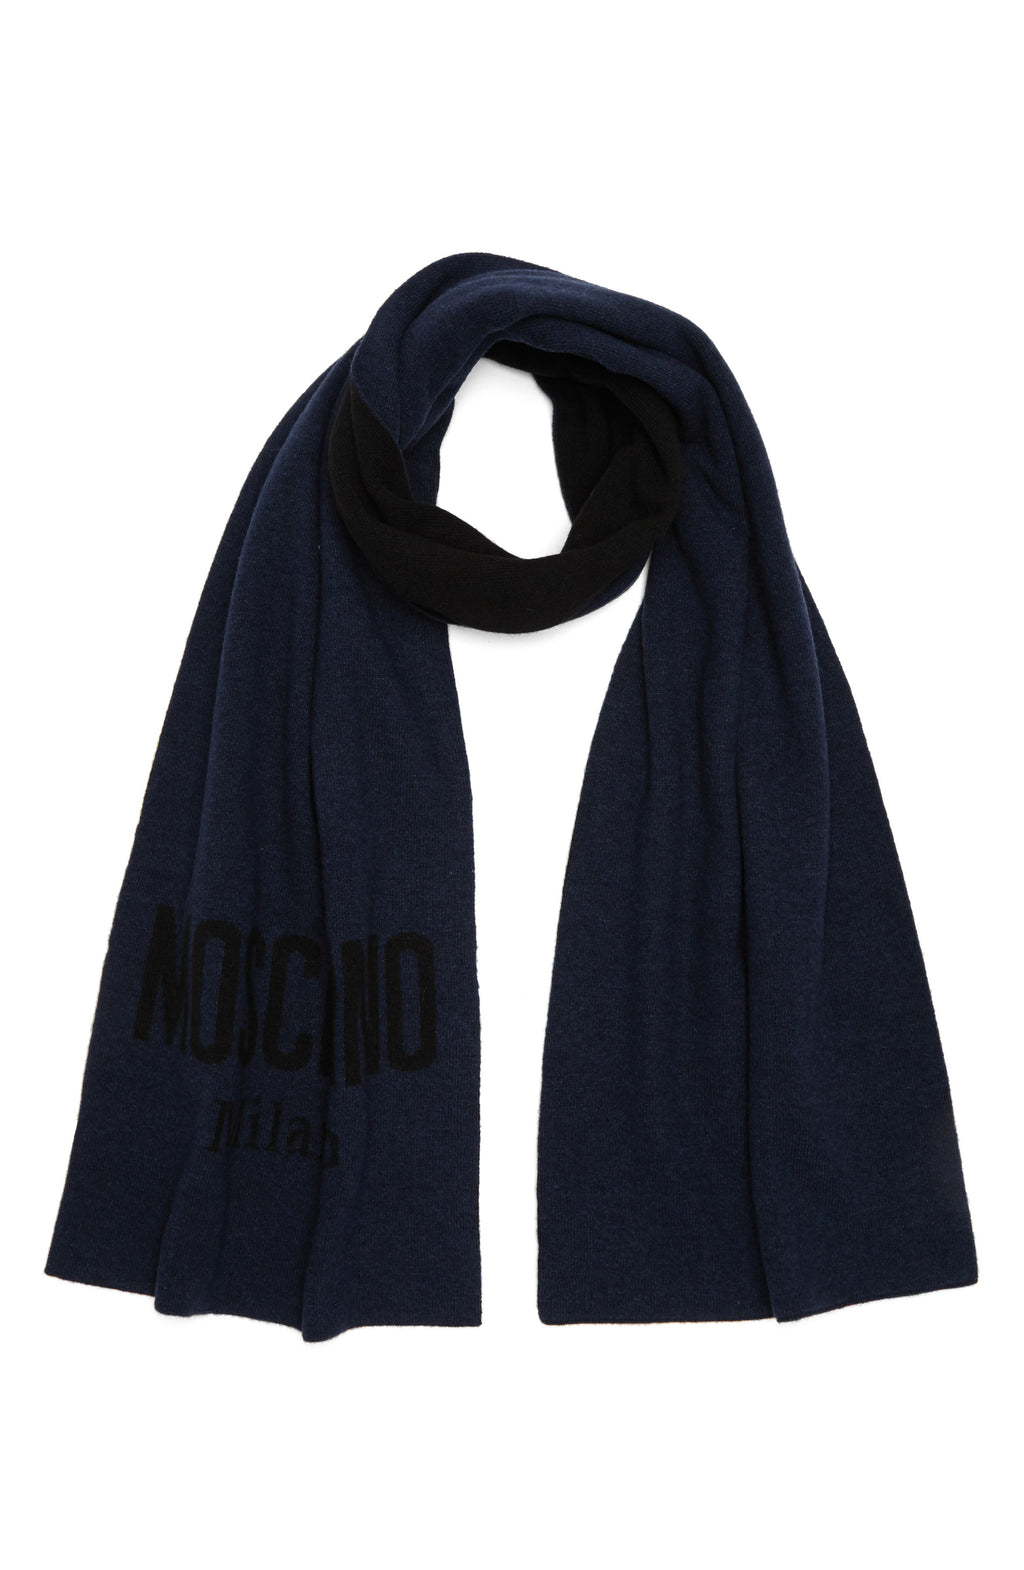 MOSCHINO 'Moschino' Cold Weather Scarf, Main, color, NAVY